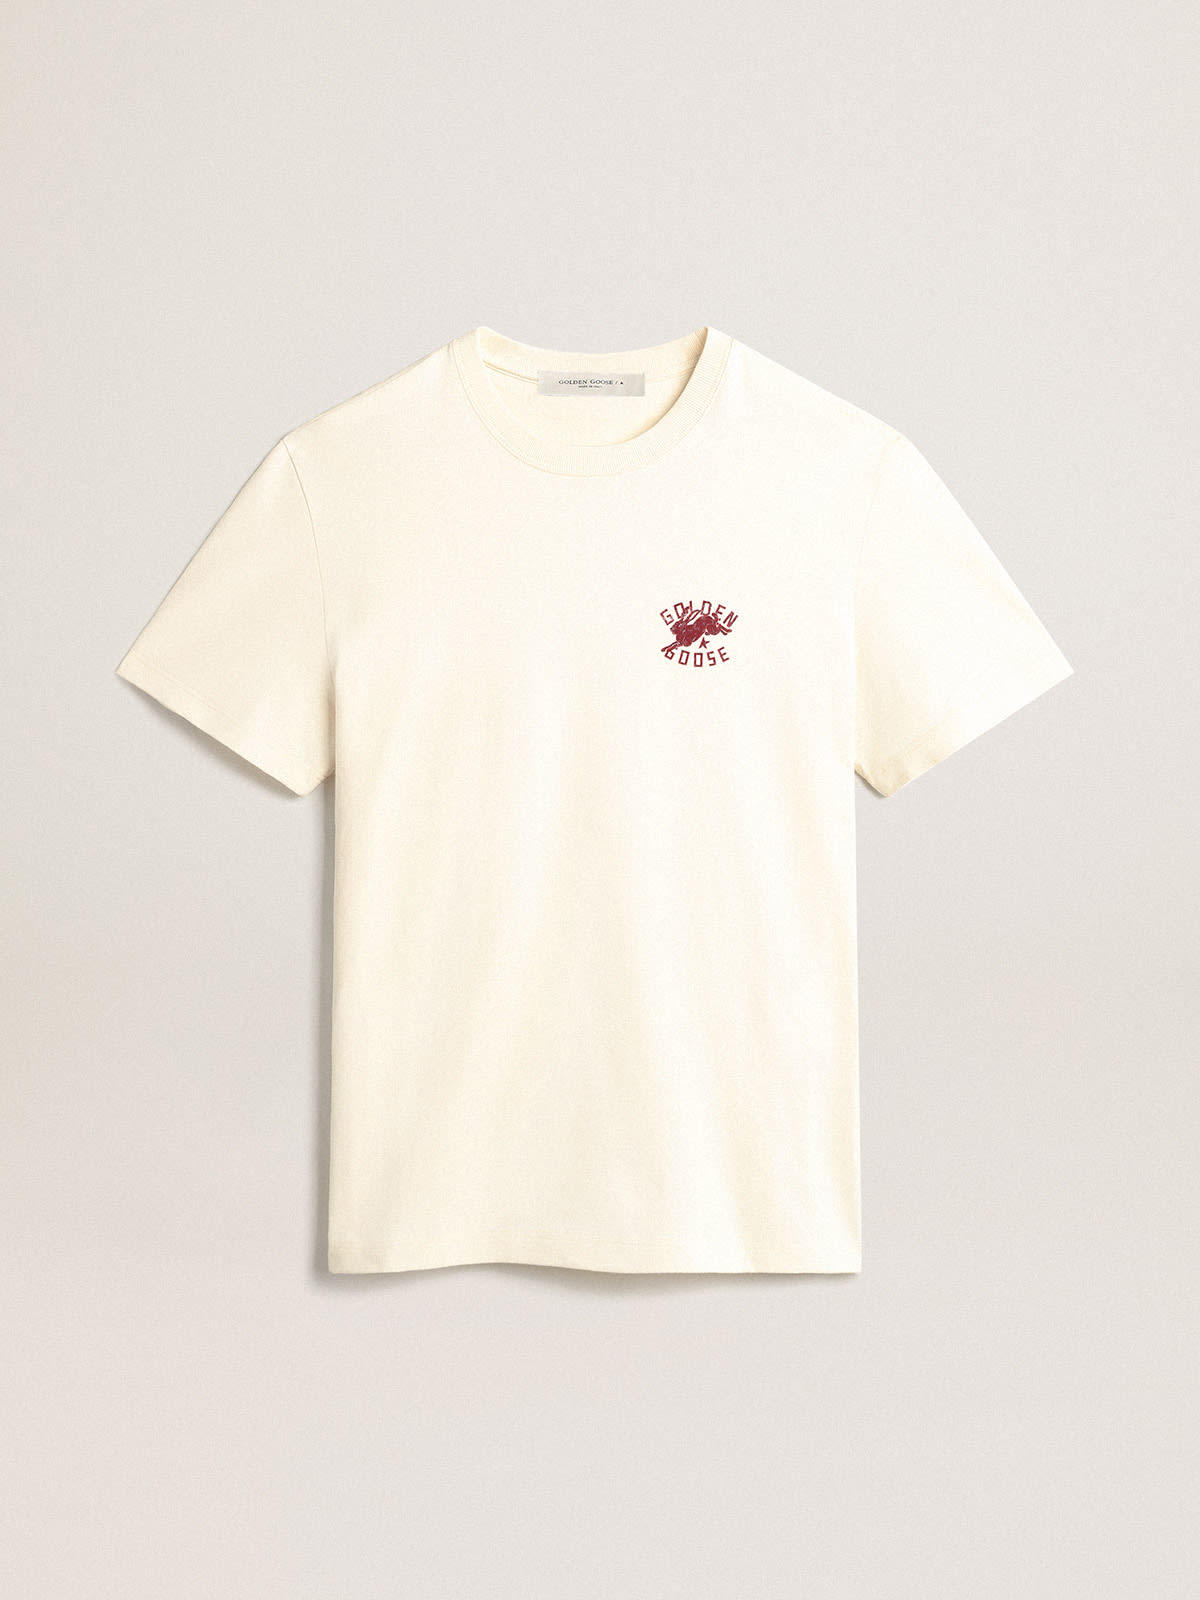 Golden Goose - Men’s heritage white T-shirt with CNY logo in 